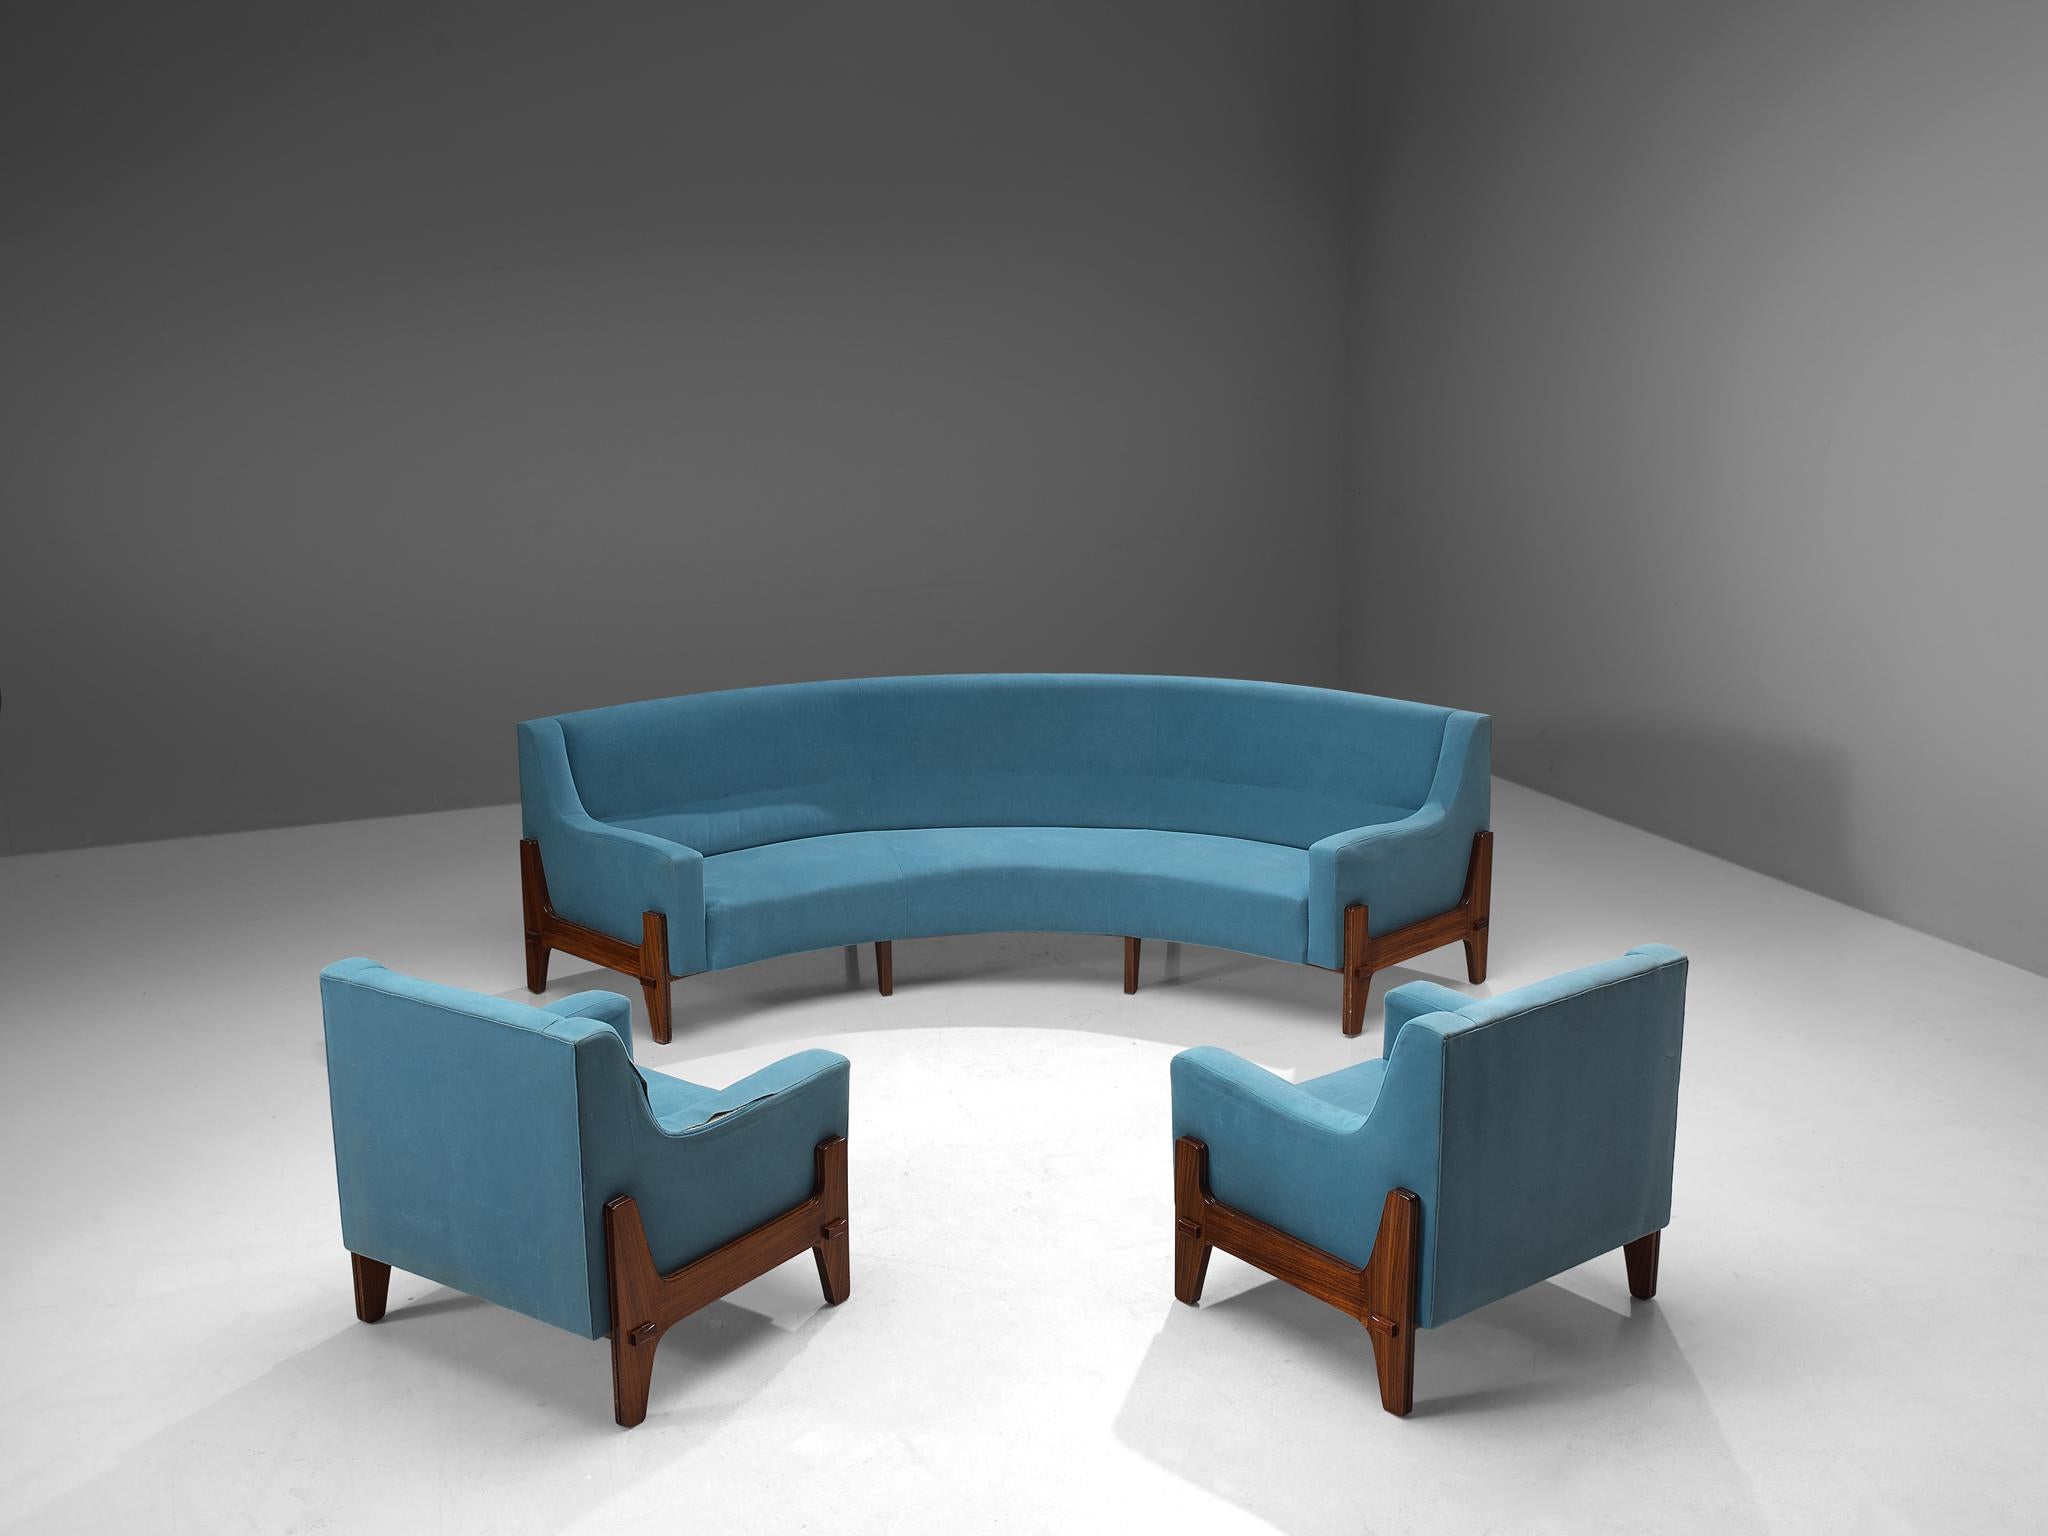 Eugenia & Luigi Reggio, lounge set, rosewood and fabric, Italy, 1950s.

This Italian lounge set, consisting of a curved sofa and two lounge chairs, feature a sturdy frame made of rosewood that is beautifully exposed on the outside of the seat.